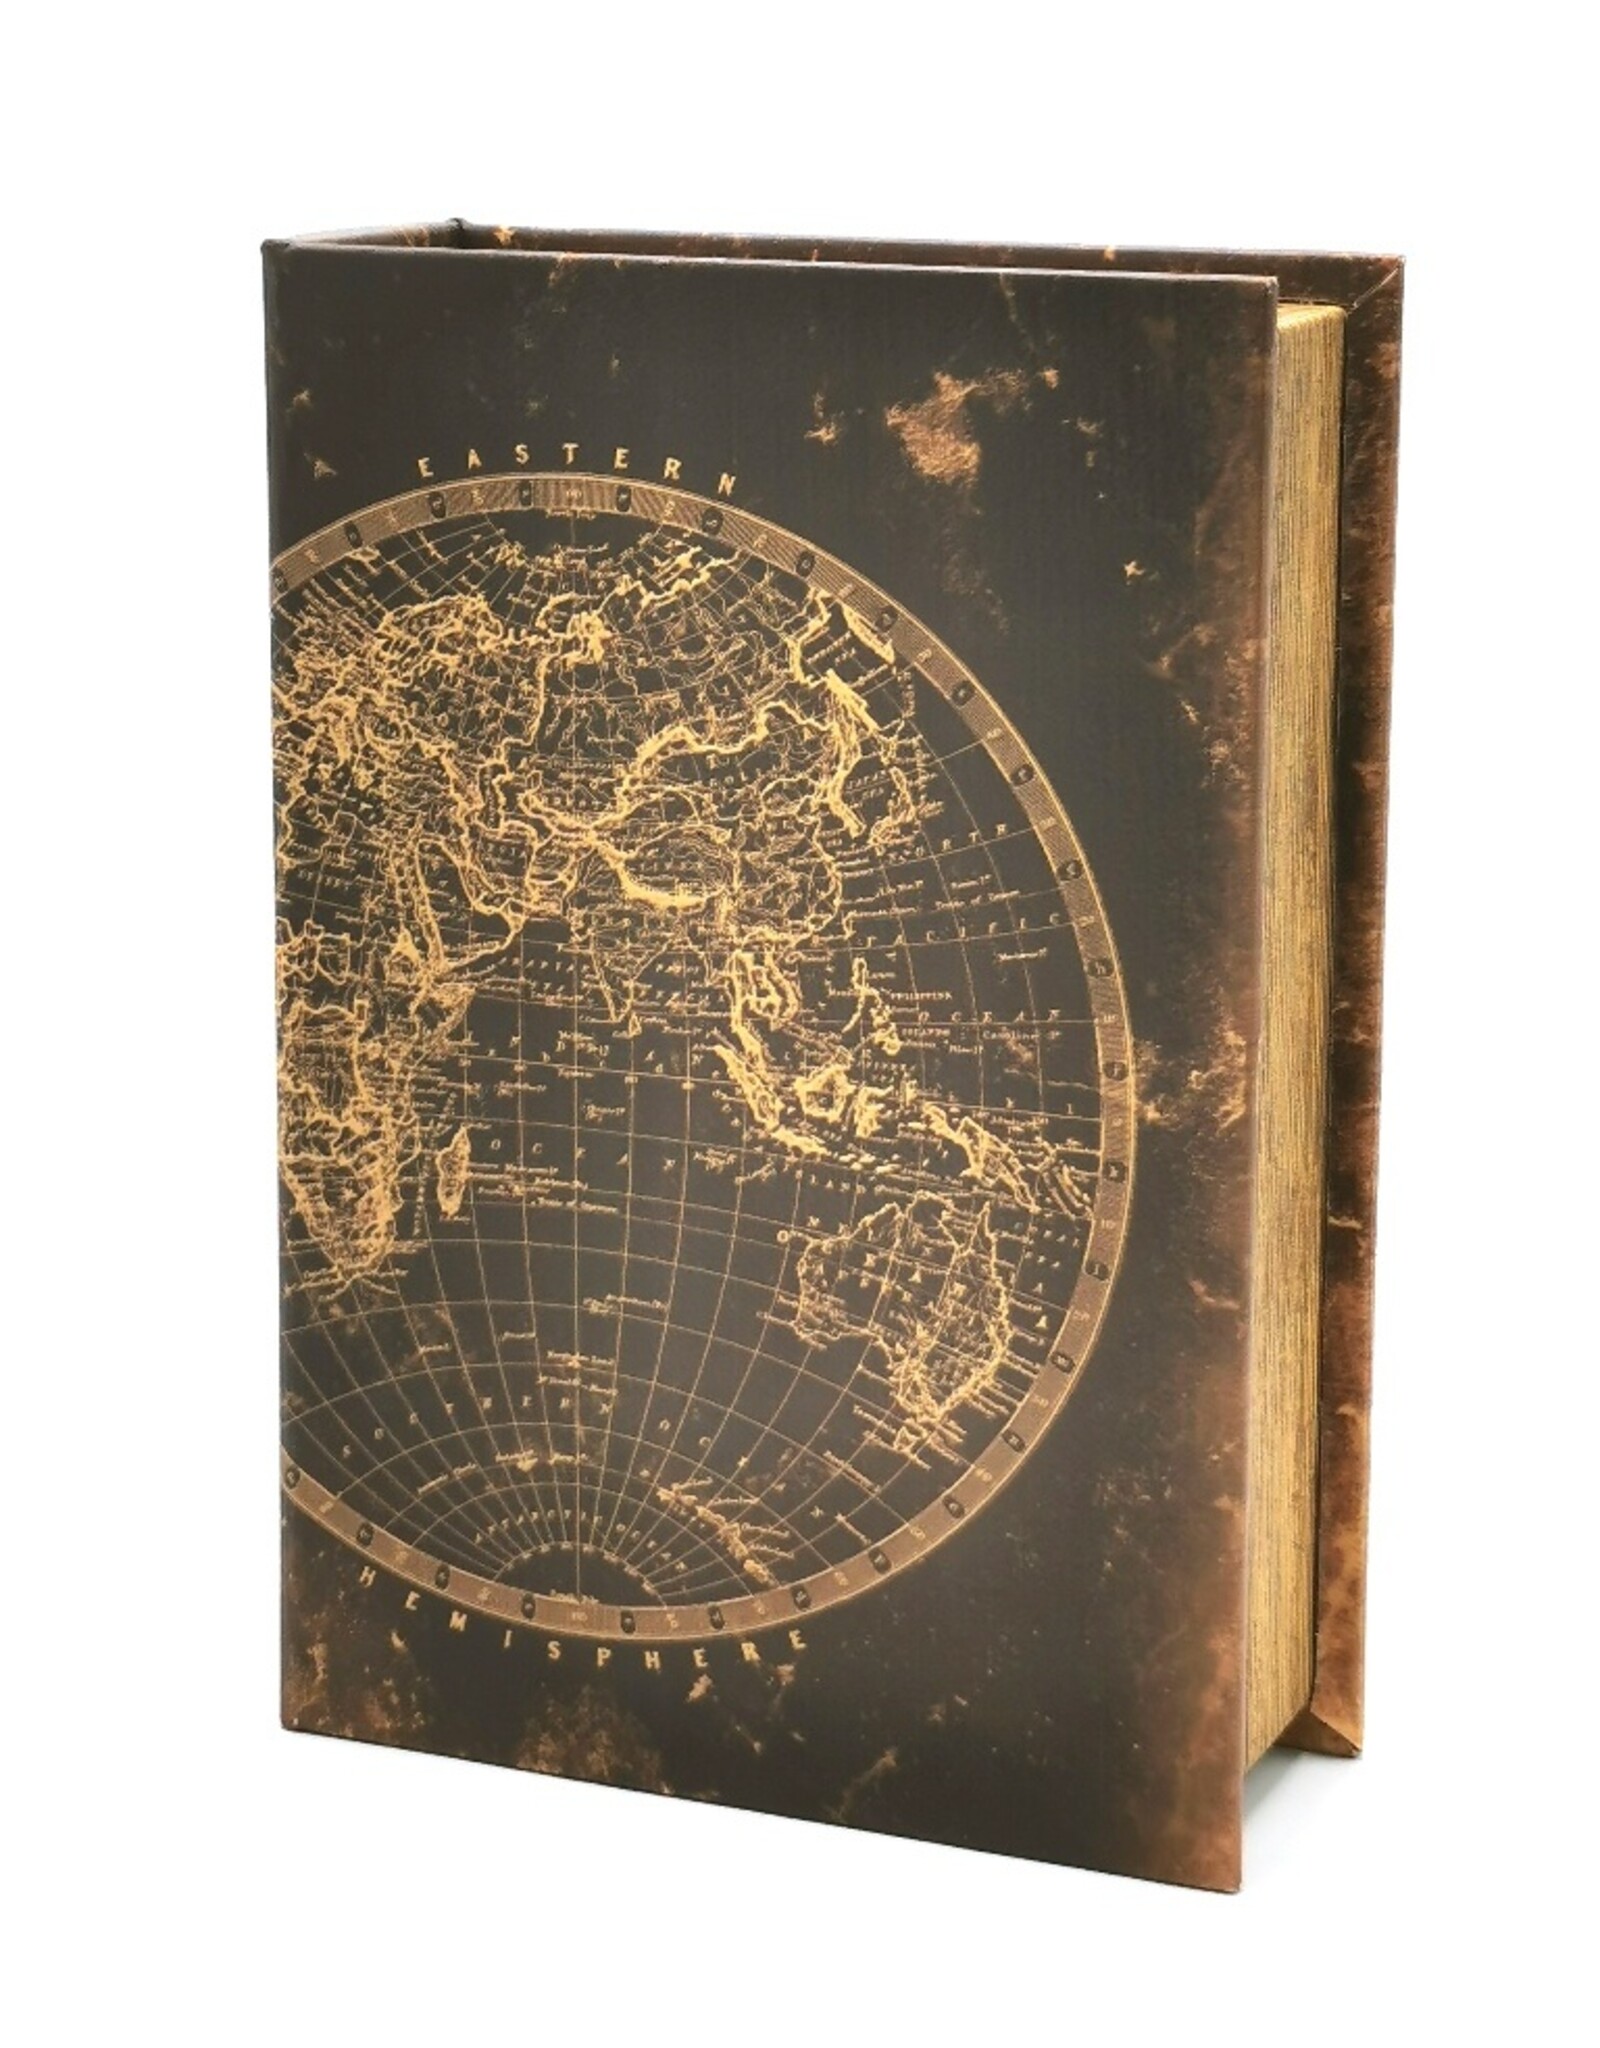 Gifts Amsterdam Giftware & Lifestyle - Opbergbox "Book World" 27cm